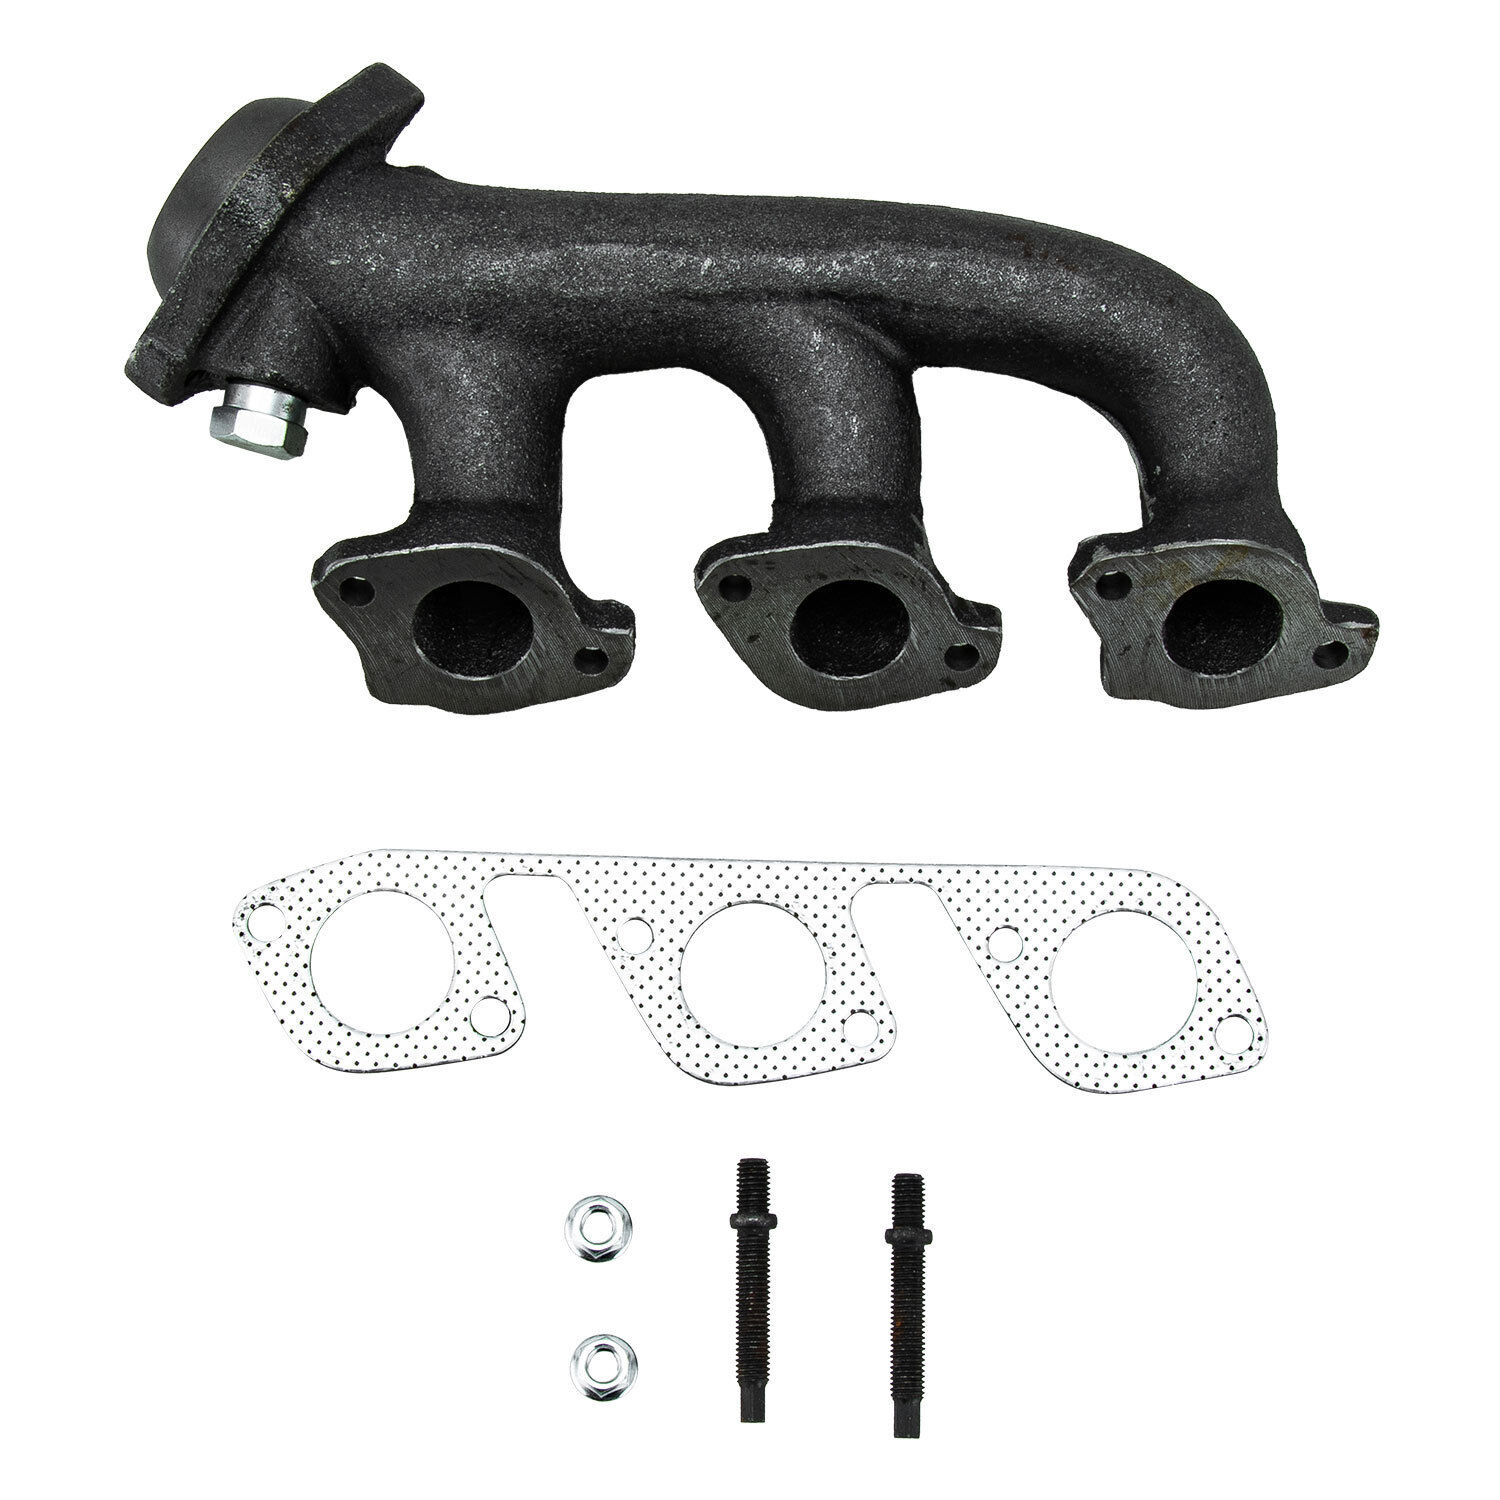 Right Exhaust Manifold w/ Gasket Kit for 1999-2008 Ford F150 E150 E250 V6 4.2L